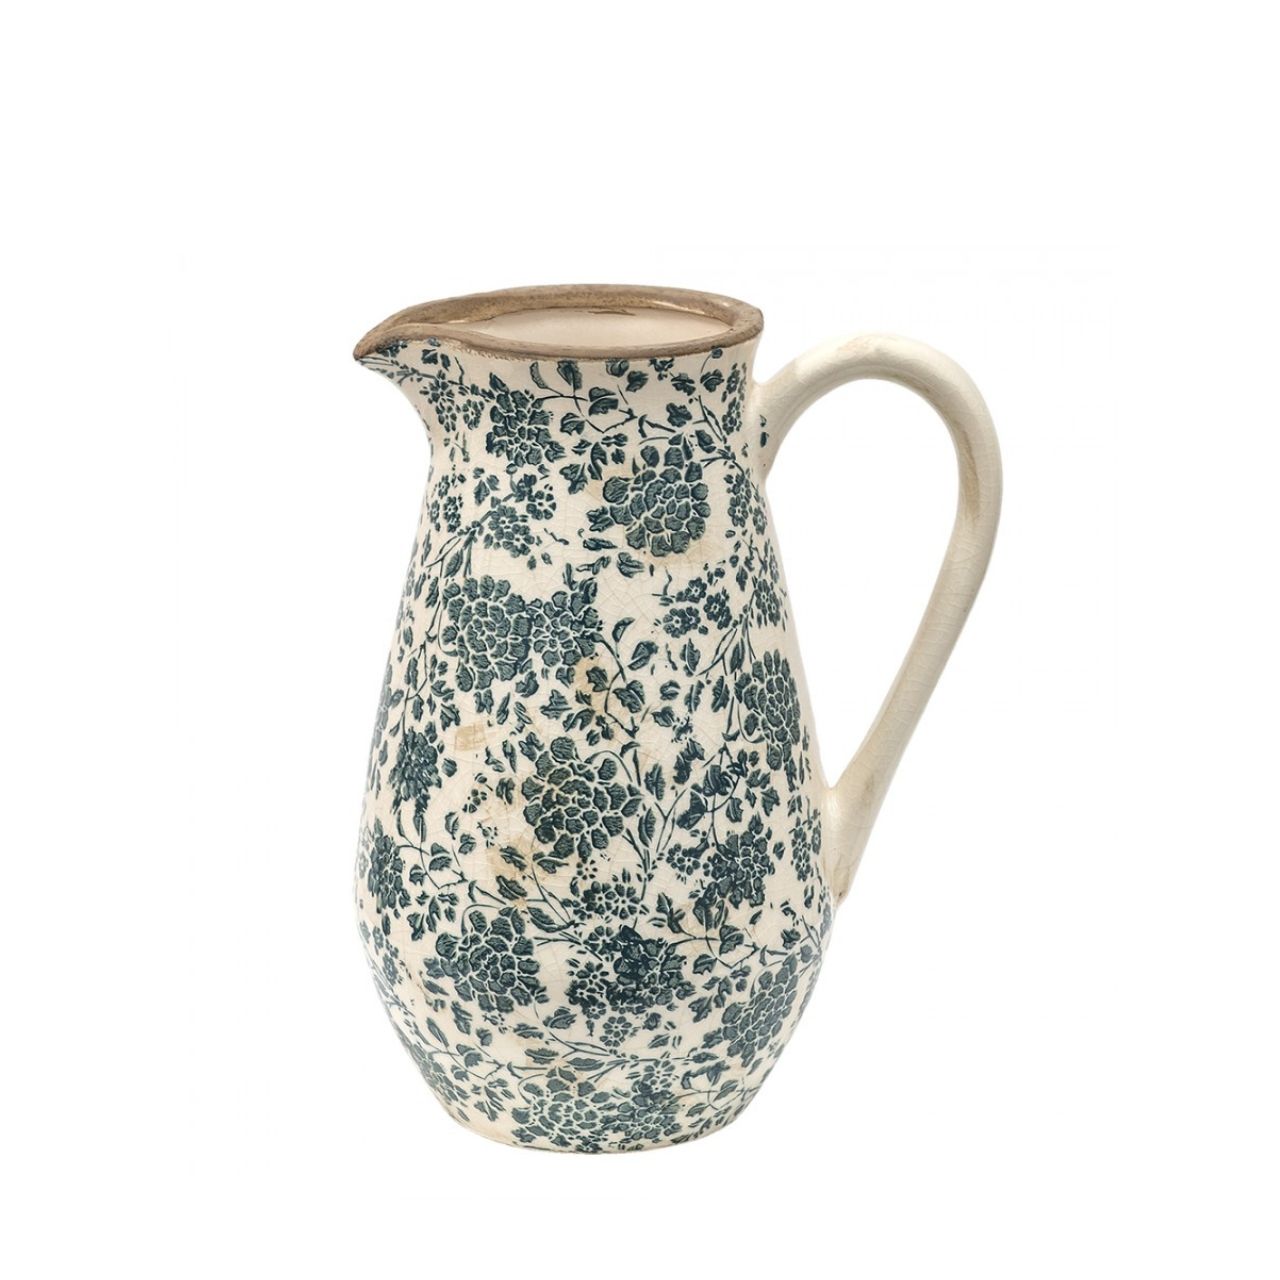 A decorative jug is the new must-have! It’s stylish and unique in its own way. You can place fun dried flowers in it or simply leave it empty. But beware! It’s a decorative jug and therefore not suitable for water. Mix and match with different heights and create a playful effect. Either way, this decorative jug is a must in your home!